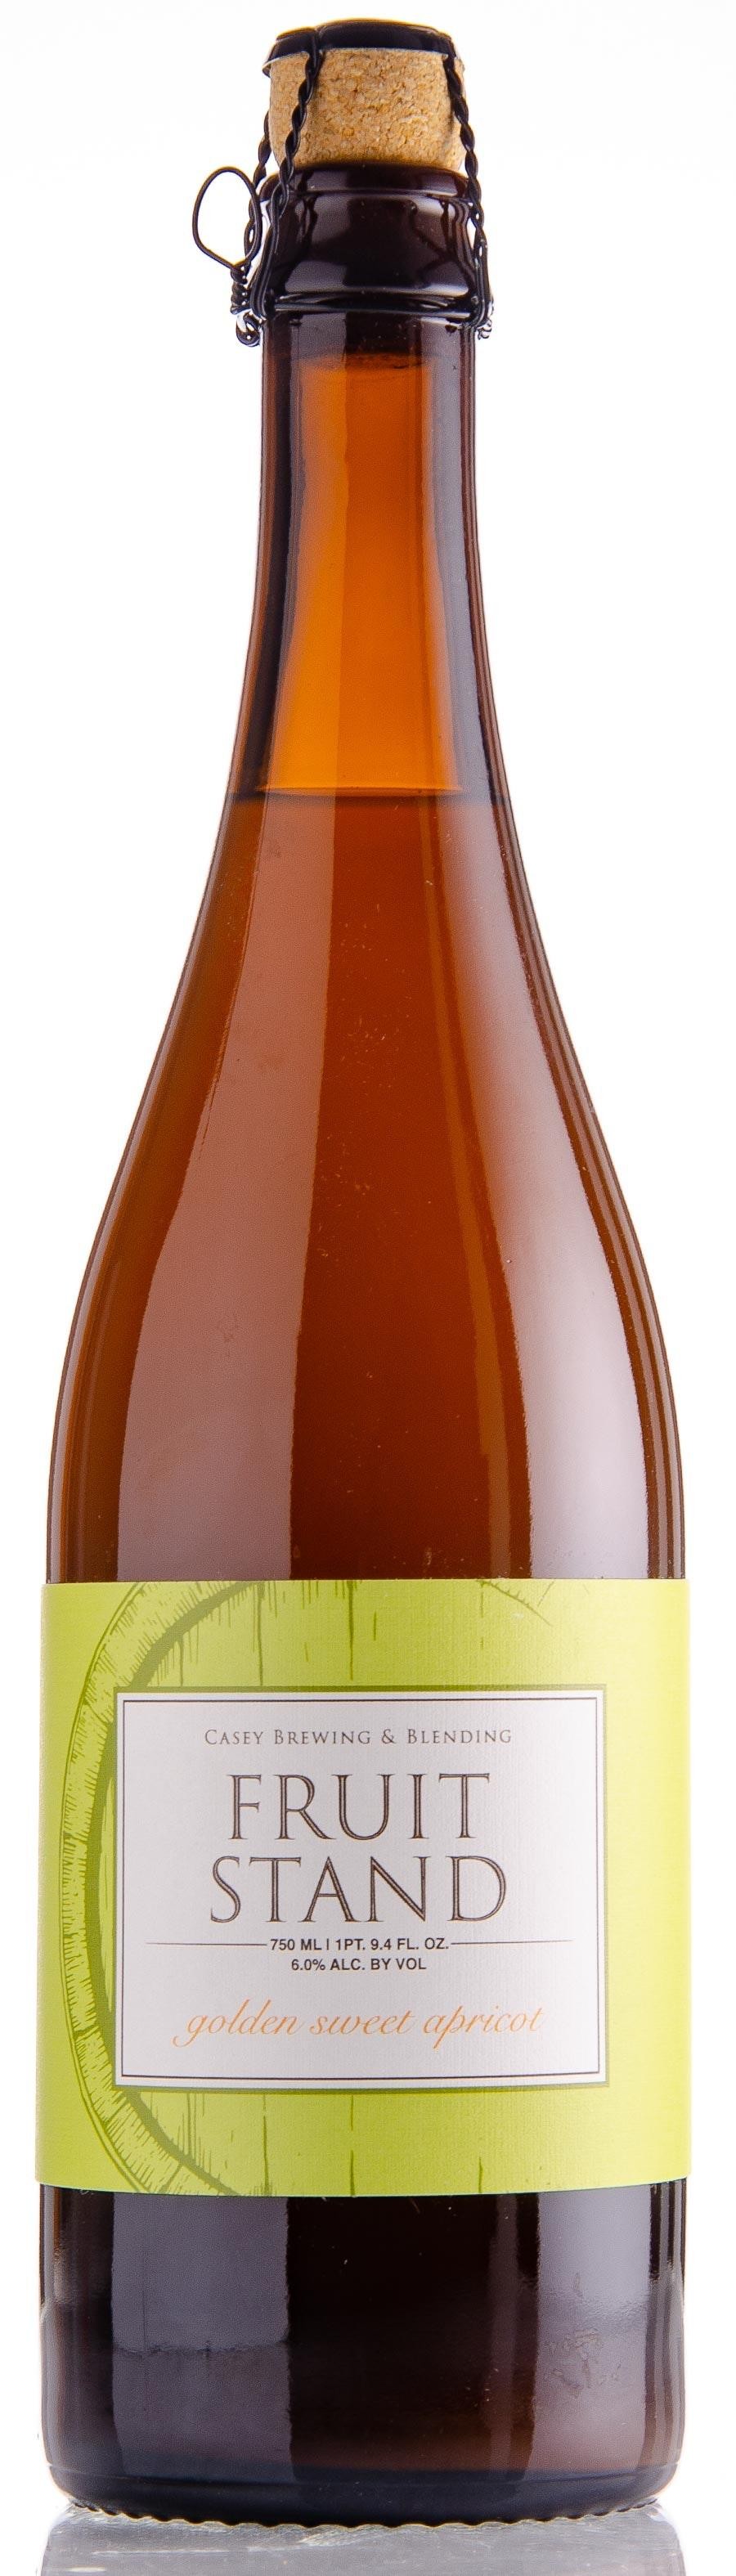 Casey Brewing - Pear Fruit Stand (23.4oz)